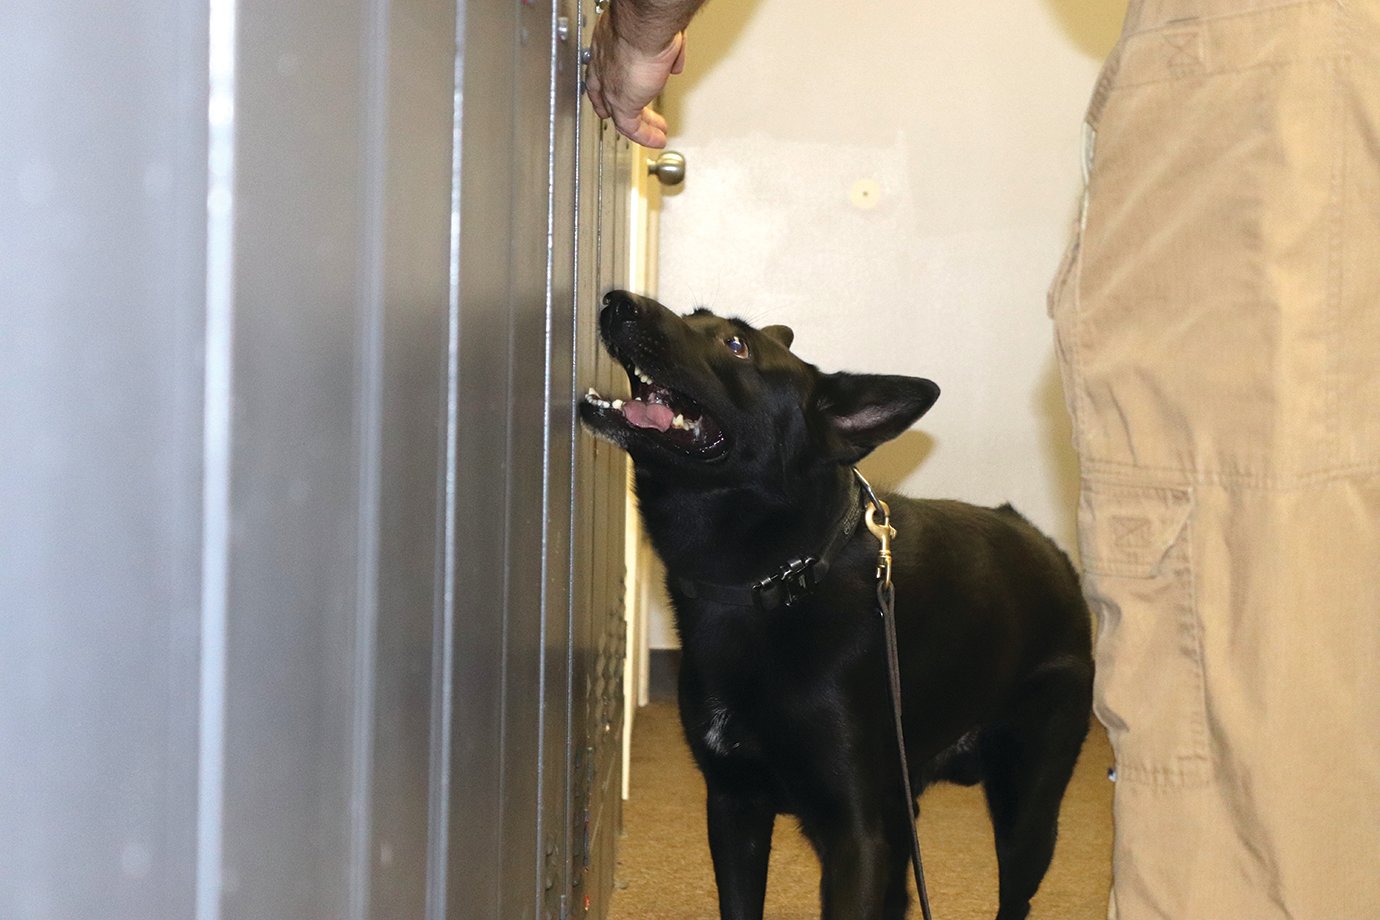 K9 Officer Demon carefully sniffs out illegal items in a locker room with Sergeant Kevin Crull.